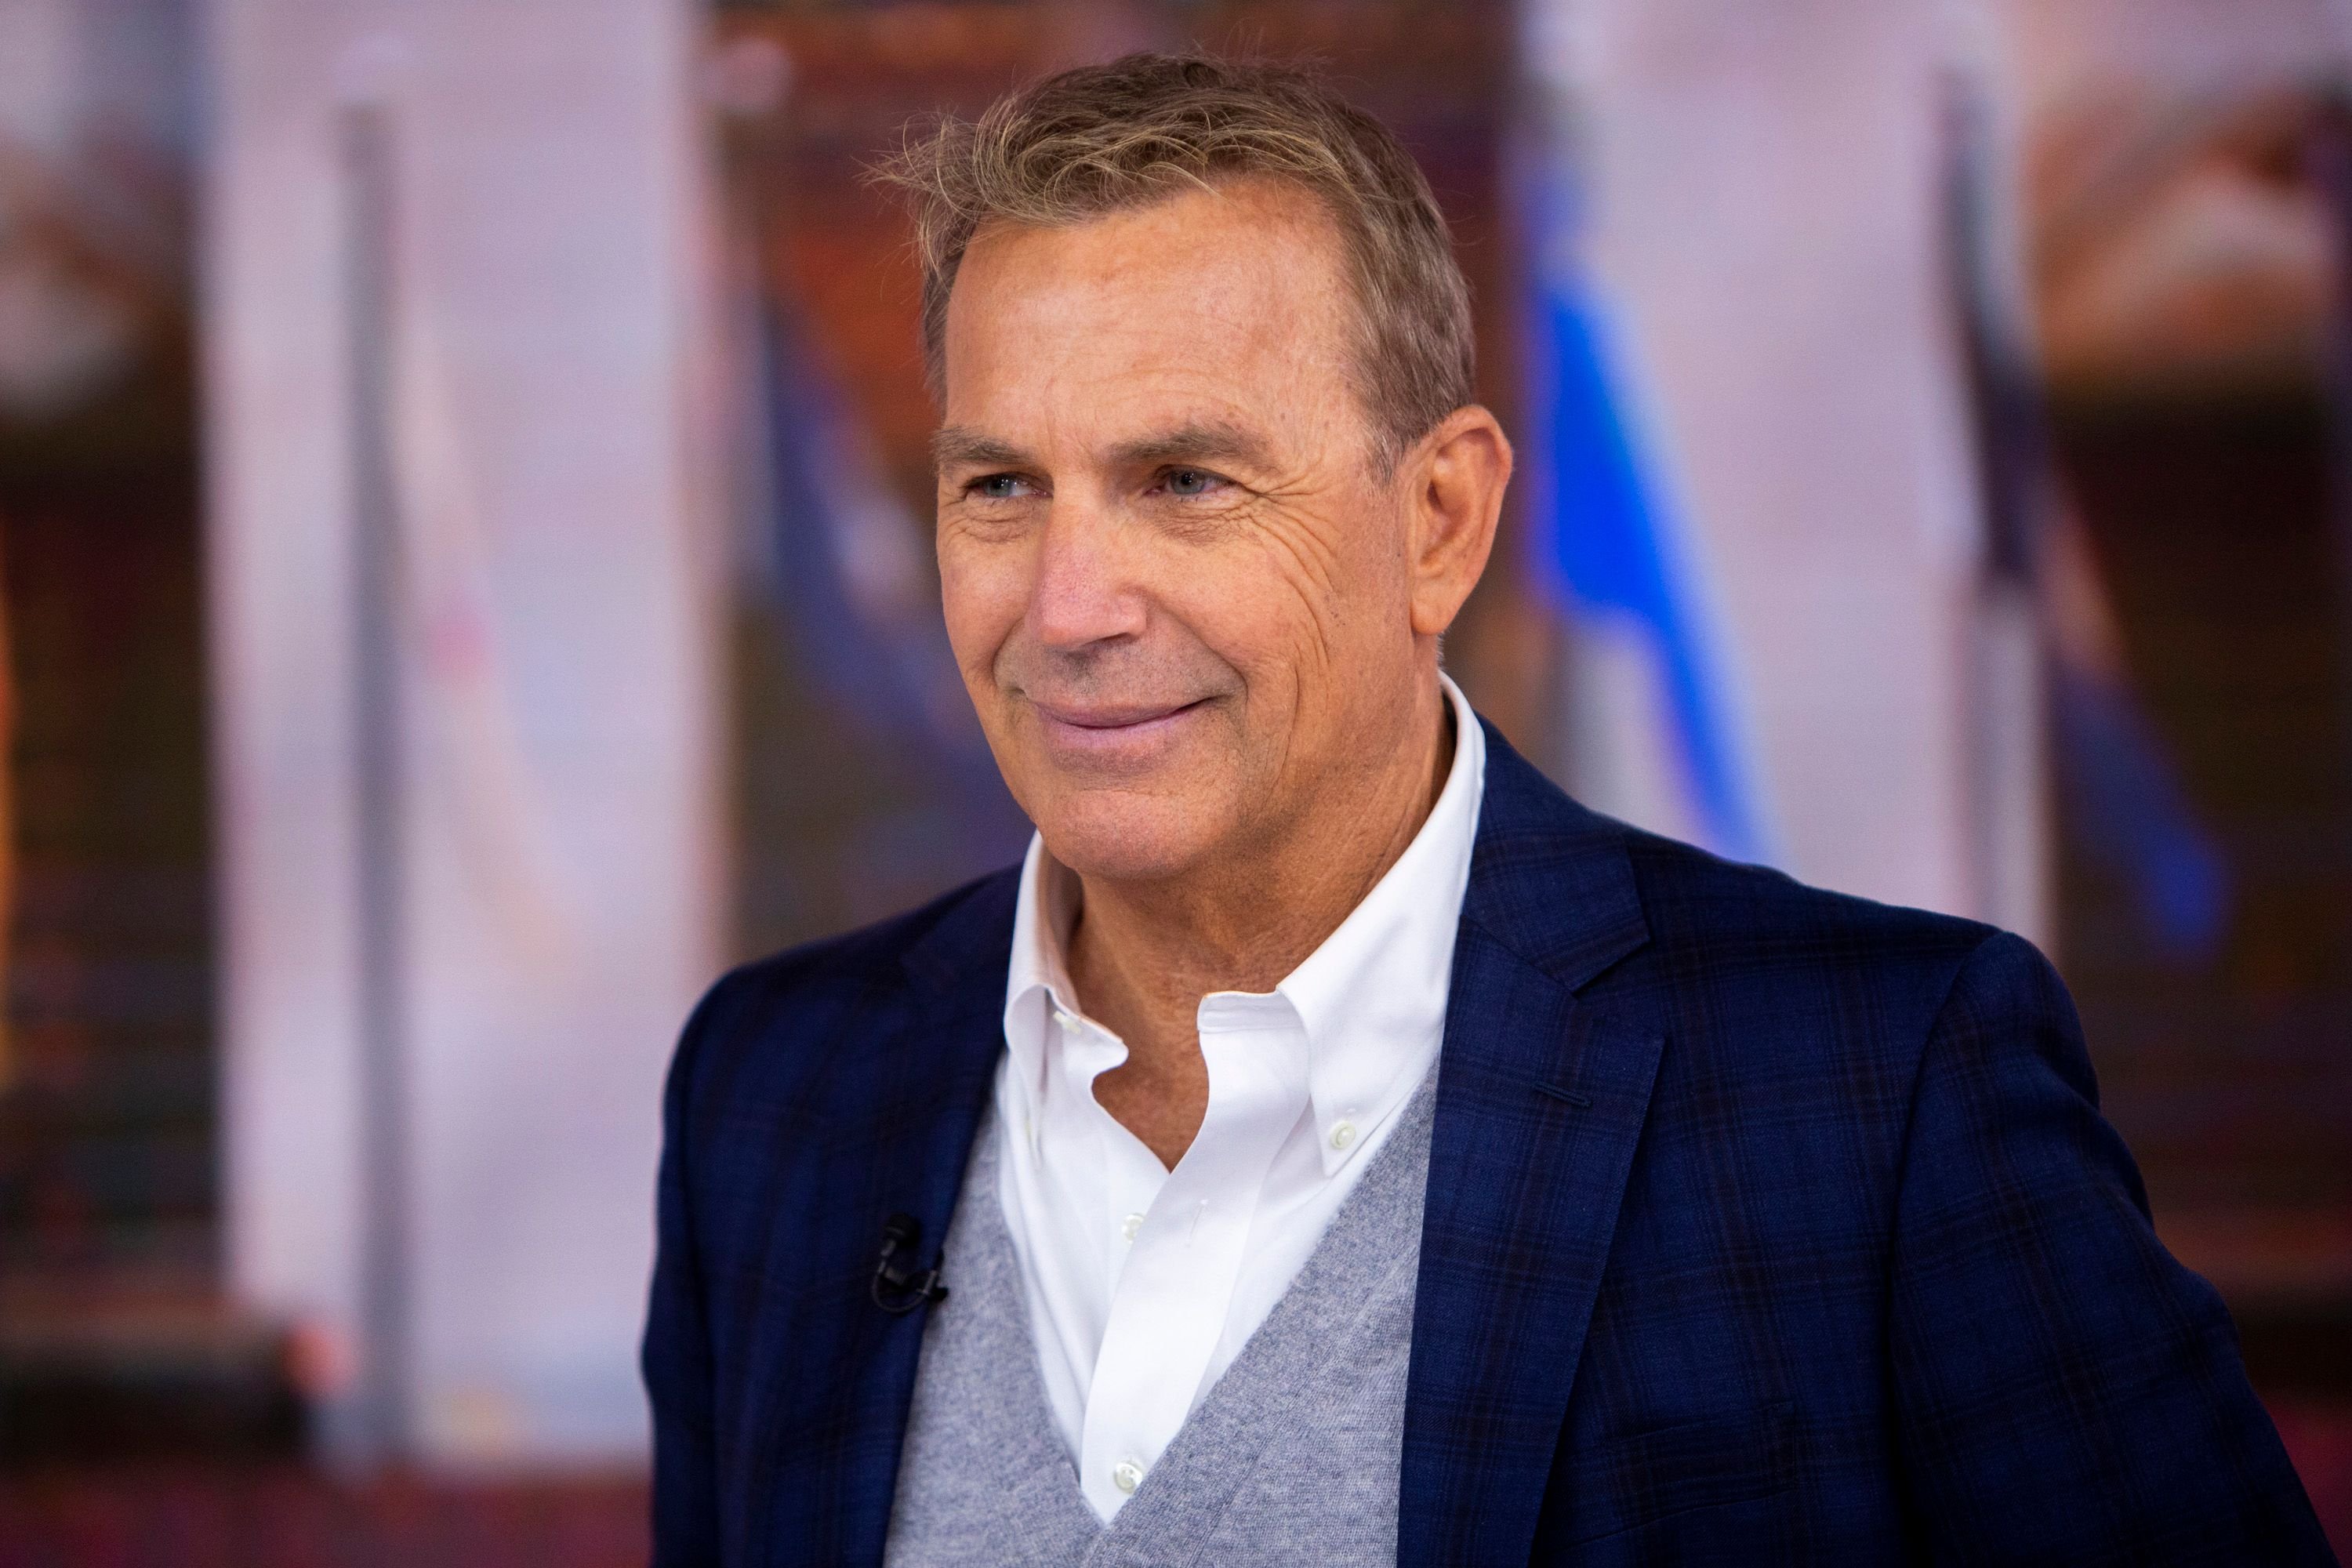 Kevin Costner on Today - Season 68 on Thursday, March 28, 2019 | Photo: Getty Images